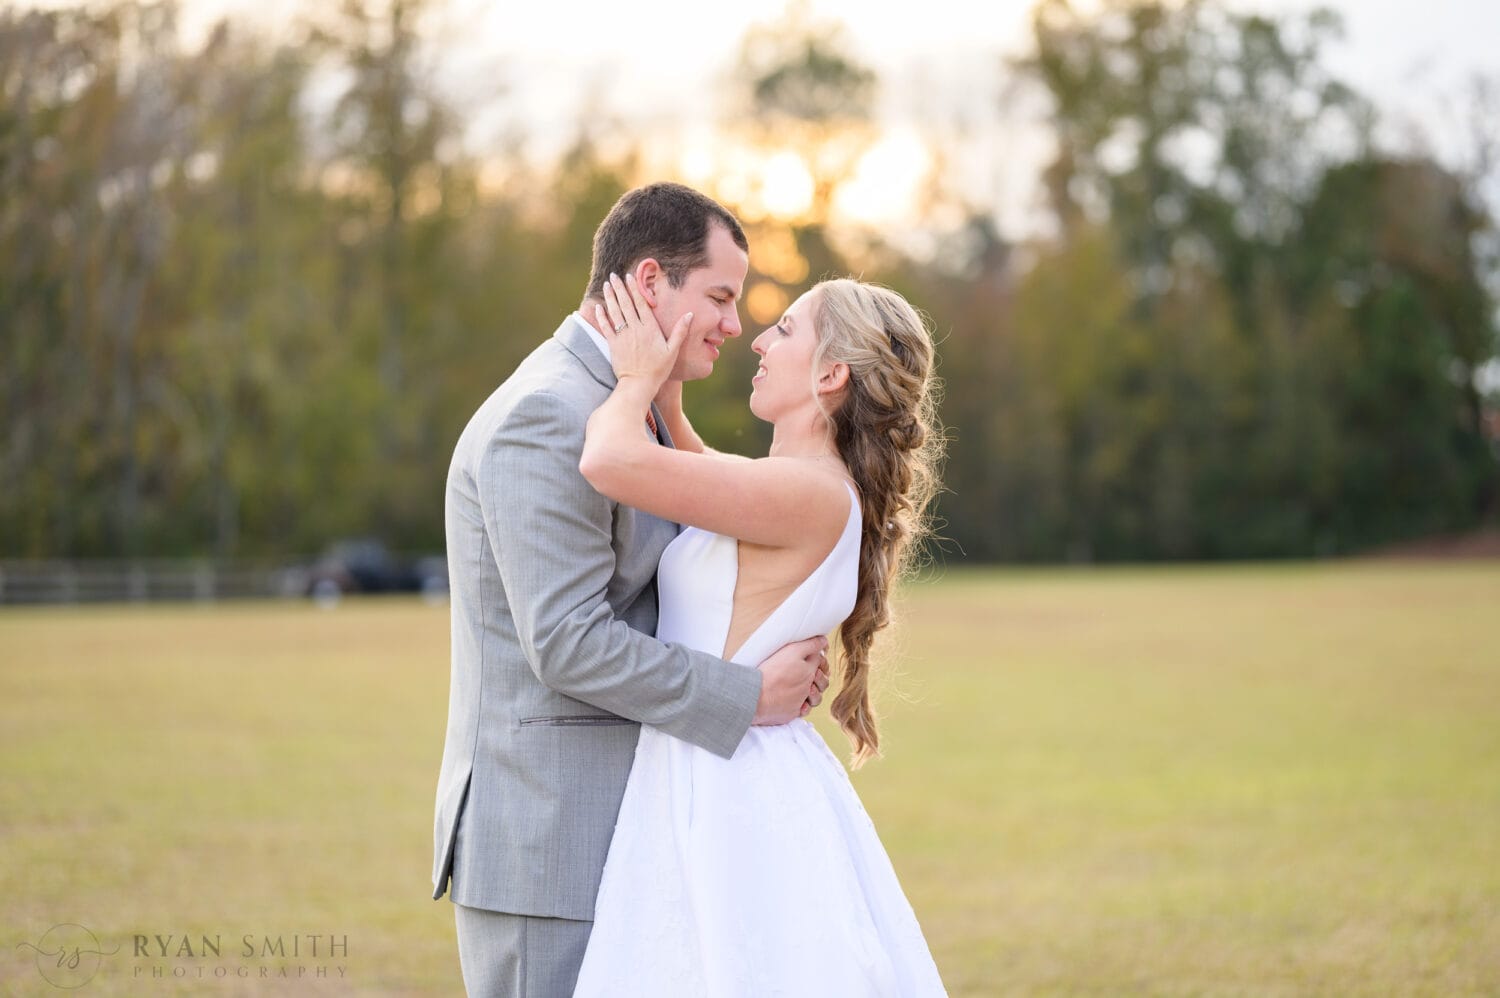 Sunset pictures with the bride and groom - The Blessed Barn